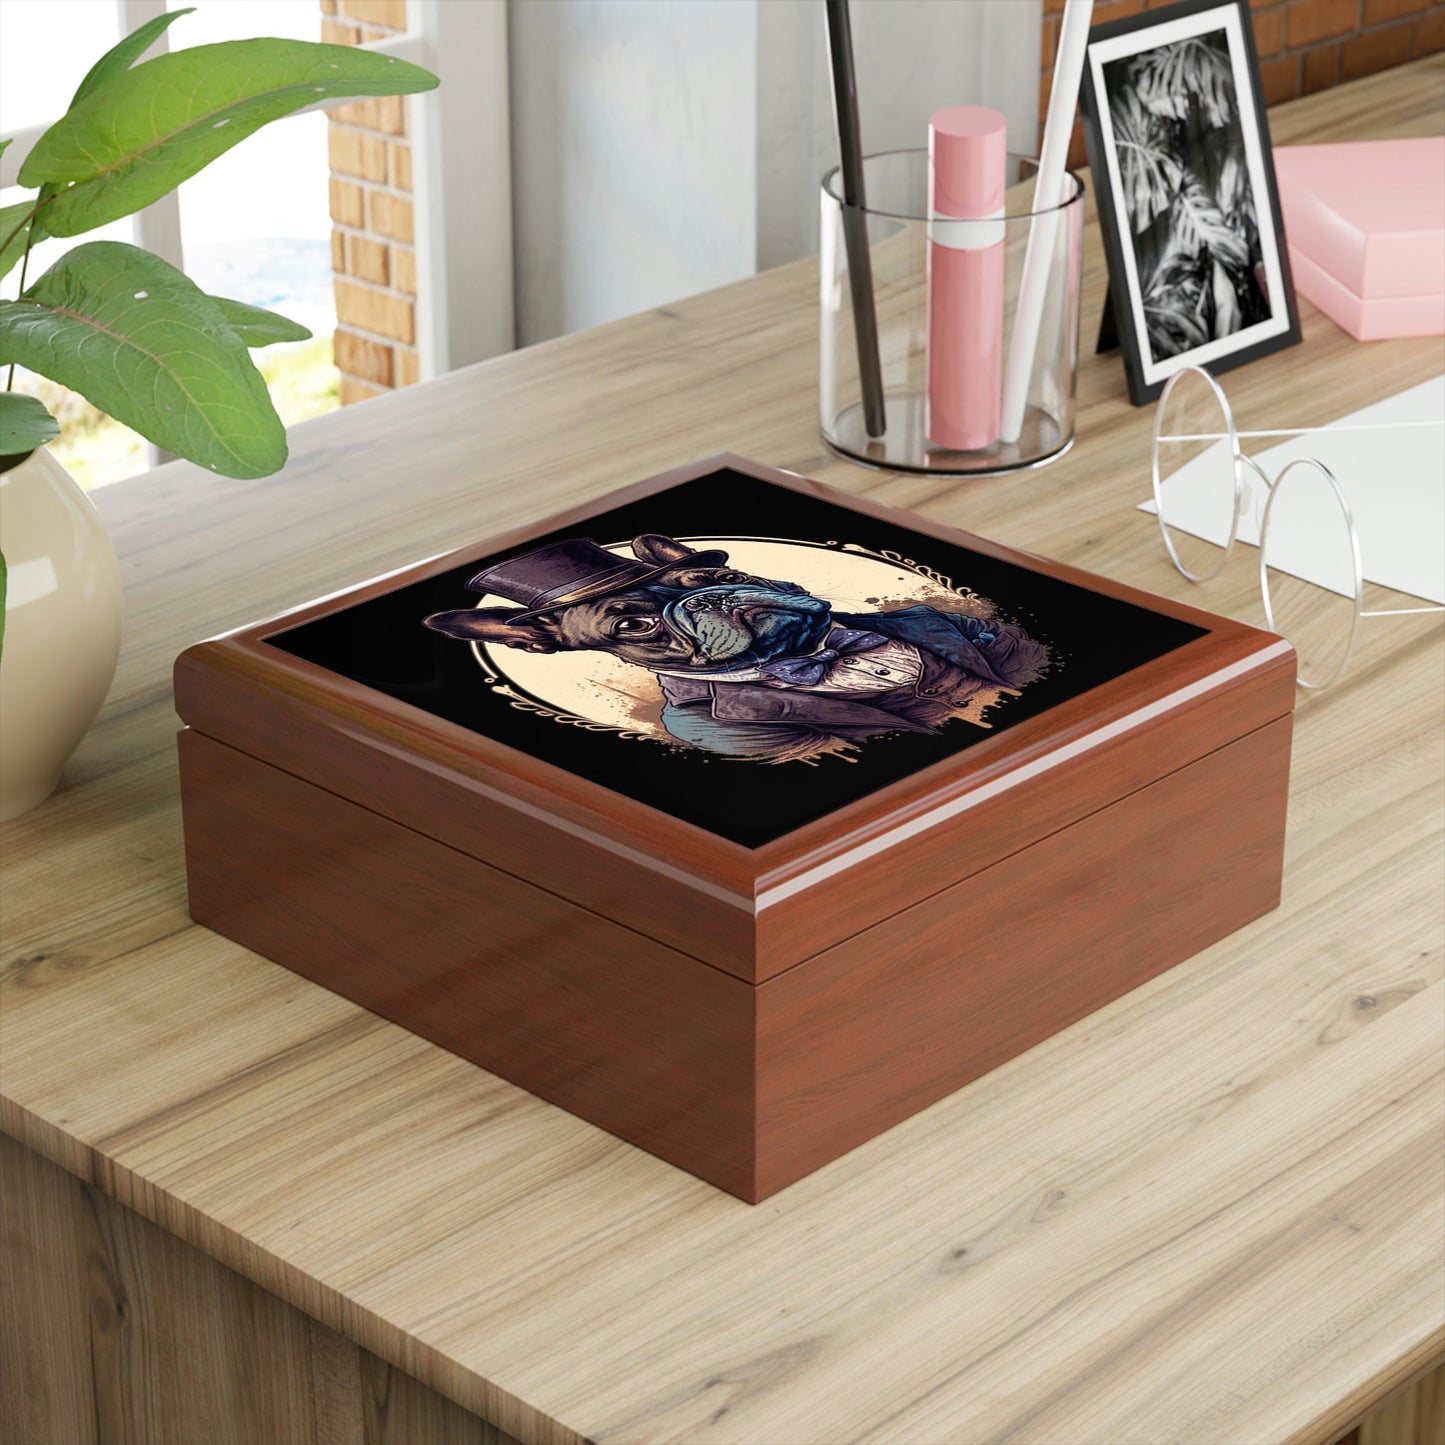 French Bulldog Portrait Jewelry Keepsake Box II - a perfect gift for the frenchy lover or any bull dog fan